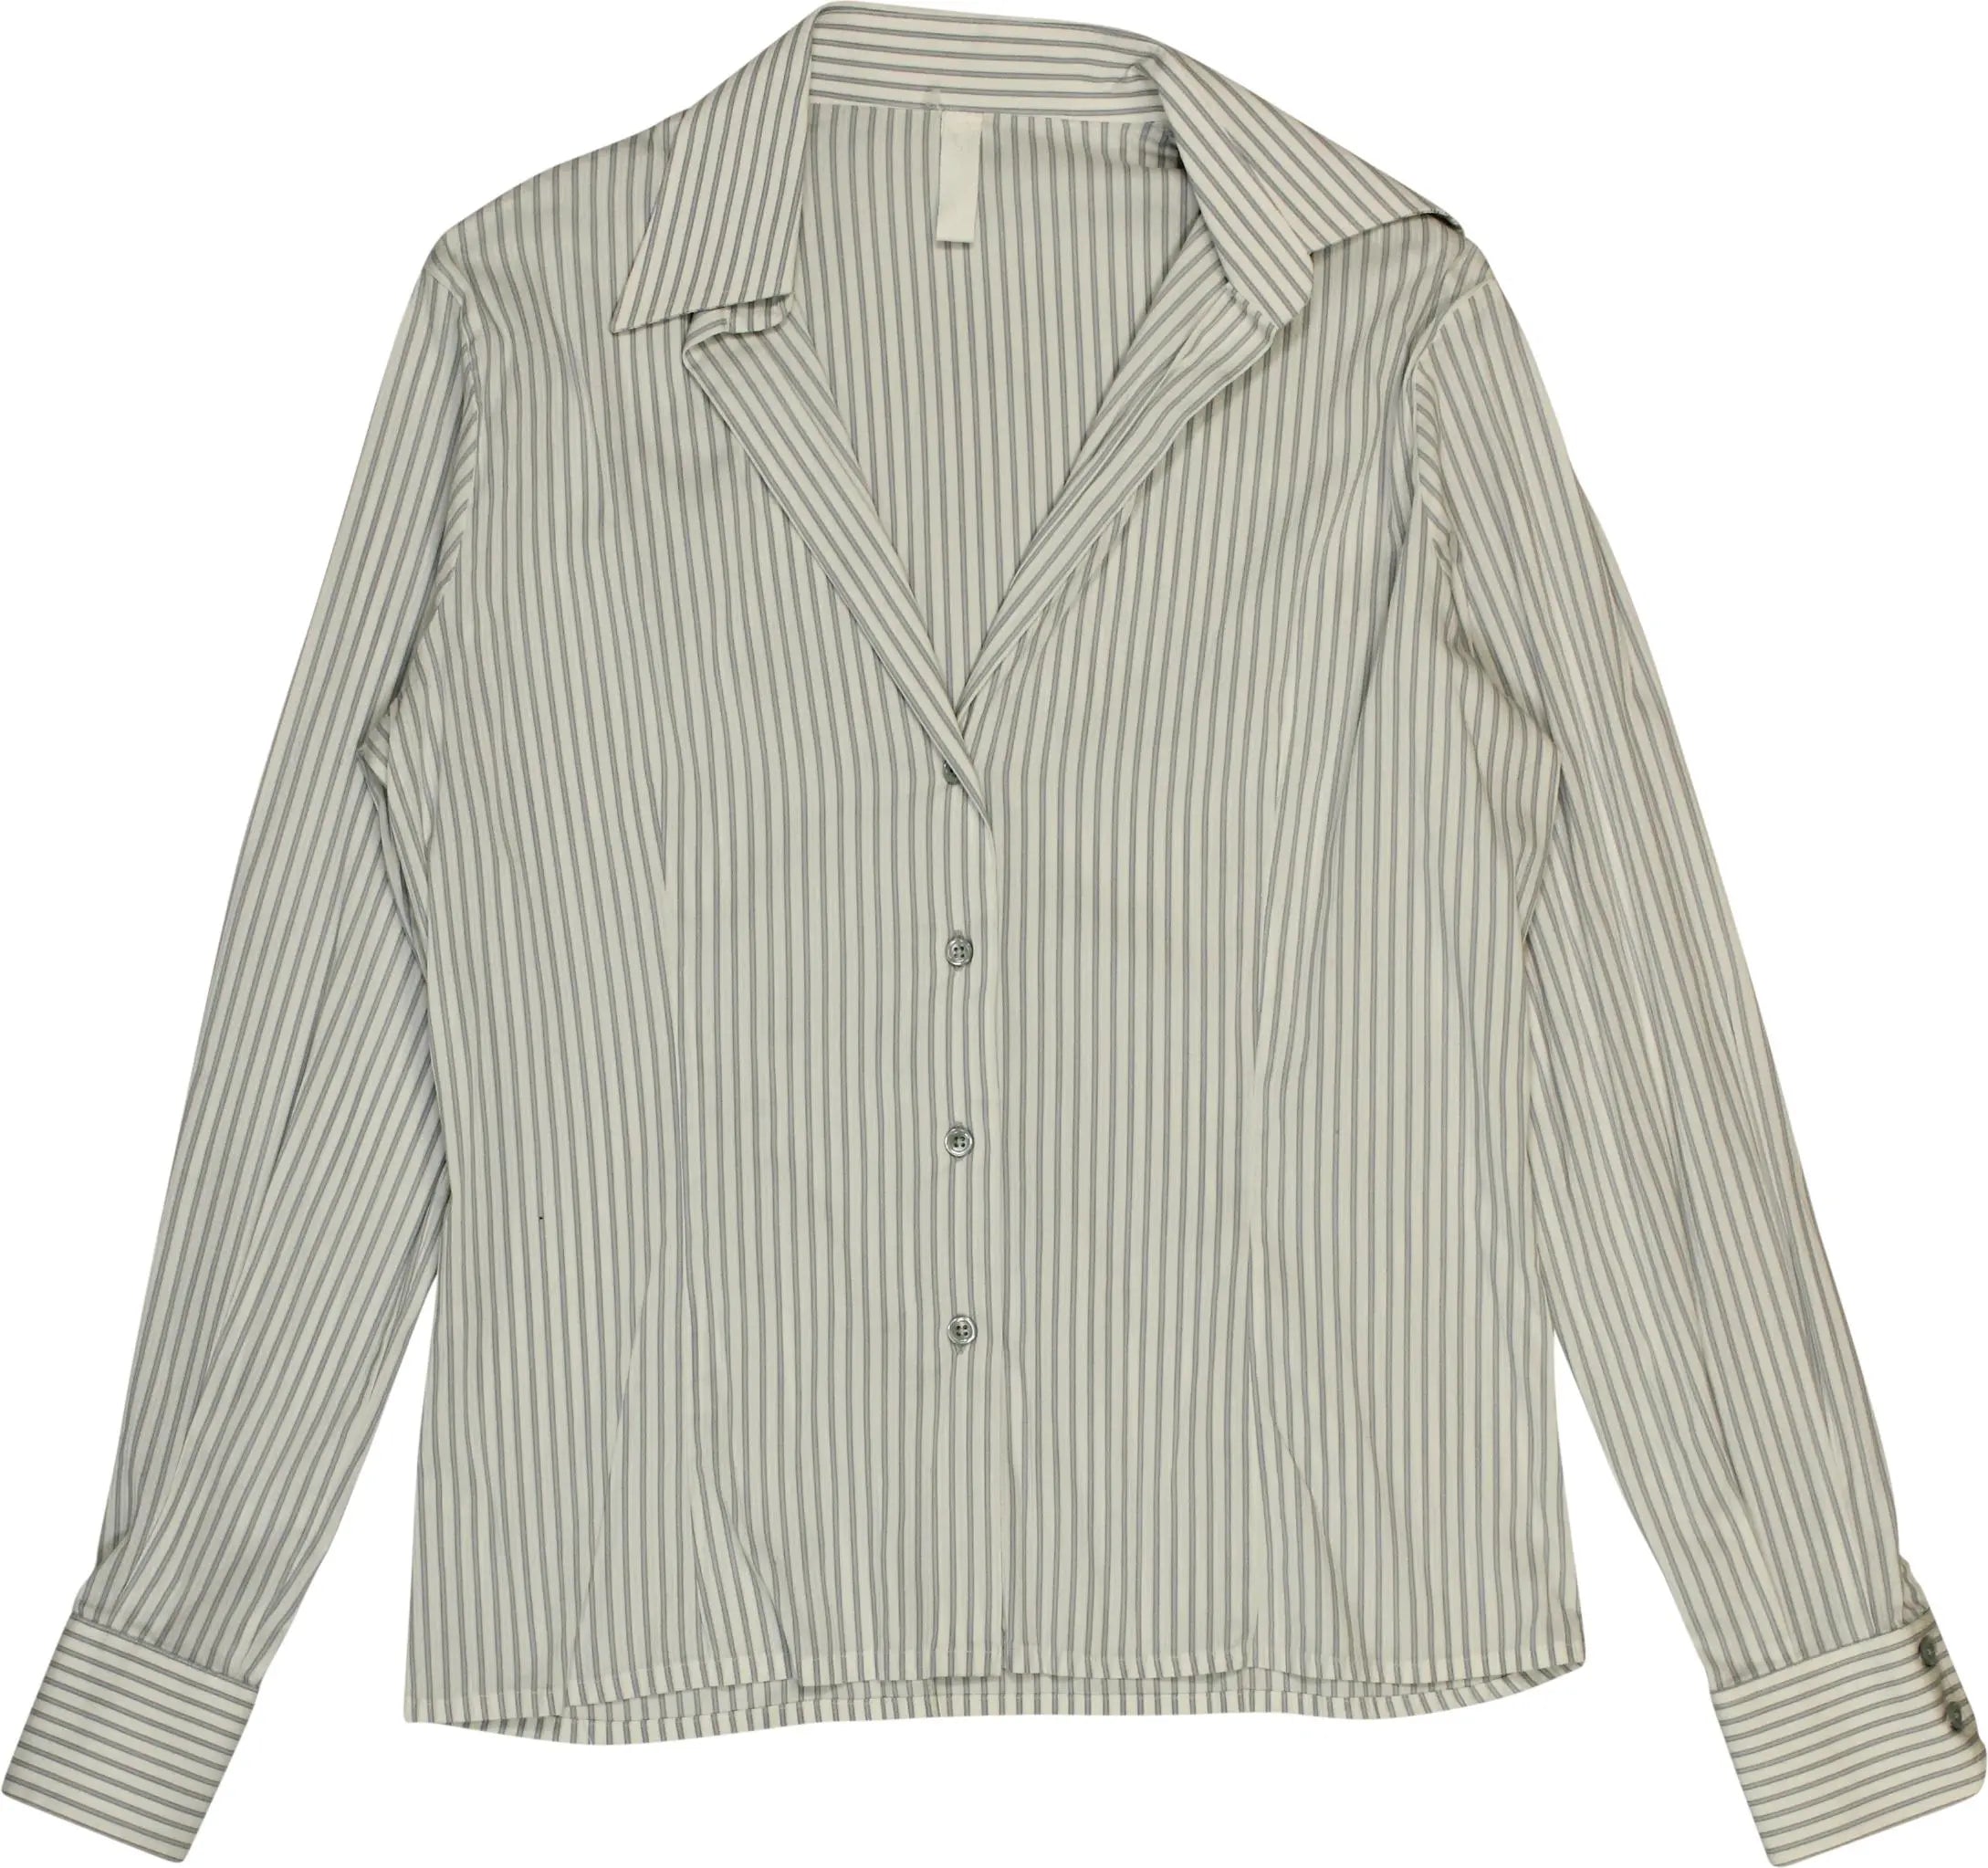 La Chemiserie Traditionelle - Striped Shirt- ThriftTale.com - Vintage and second handclothing